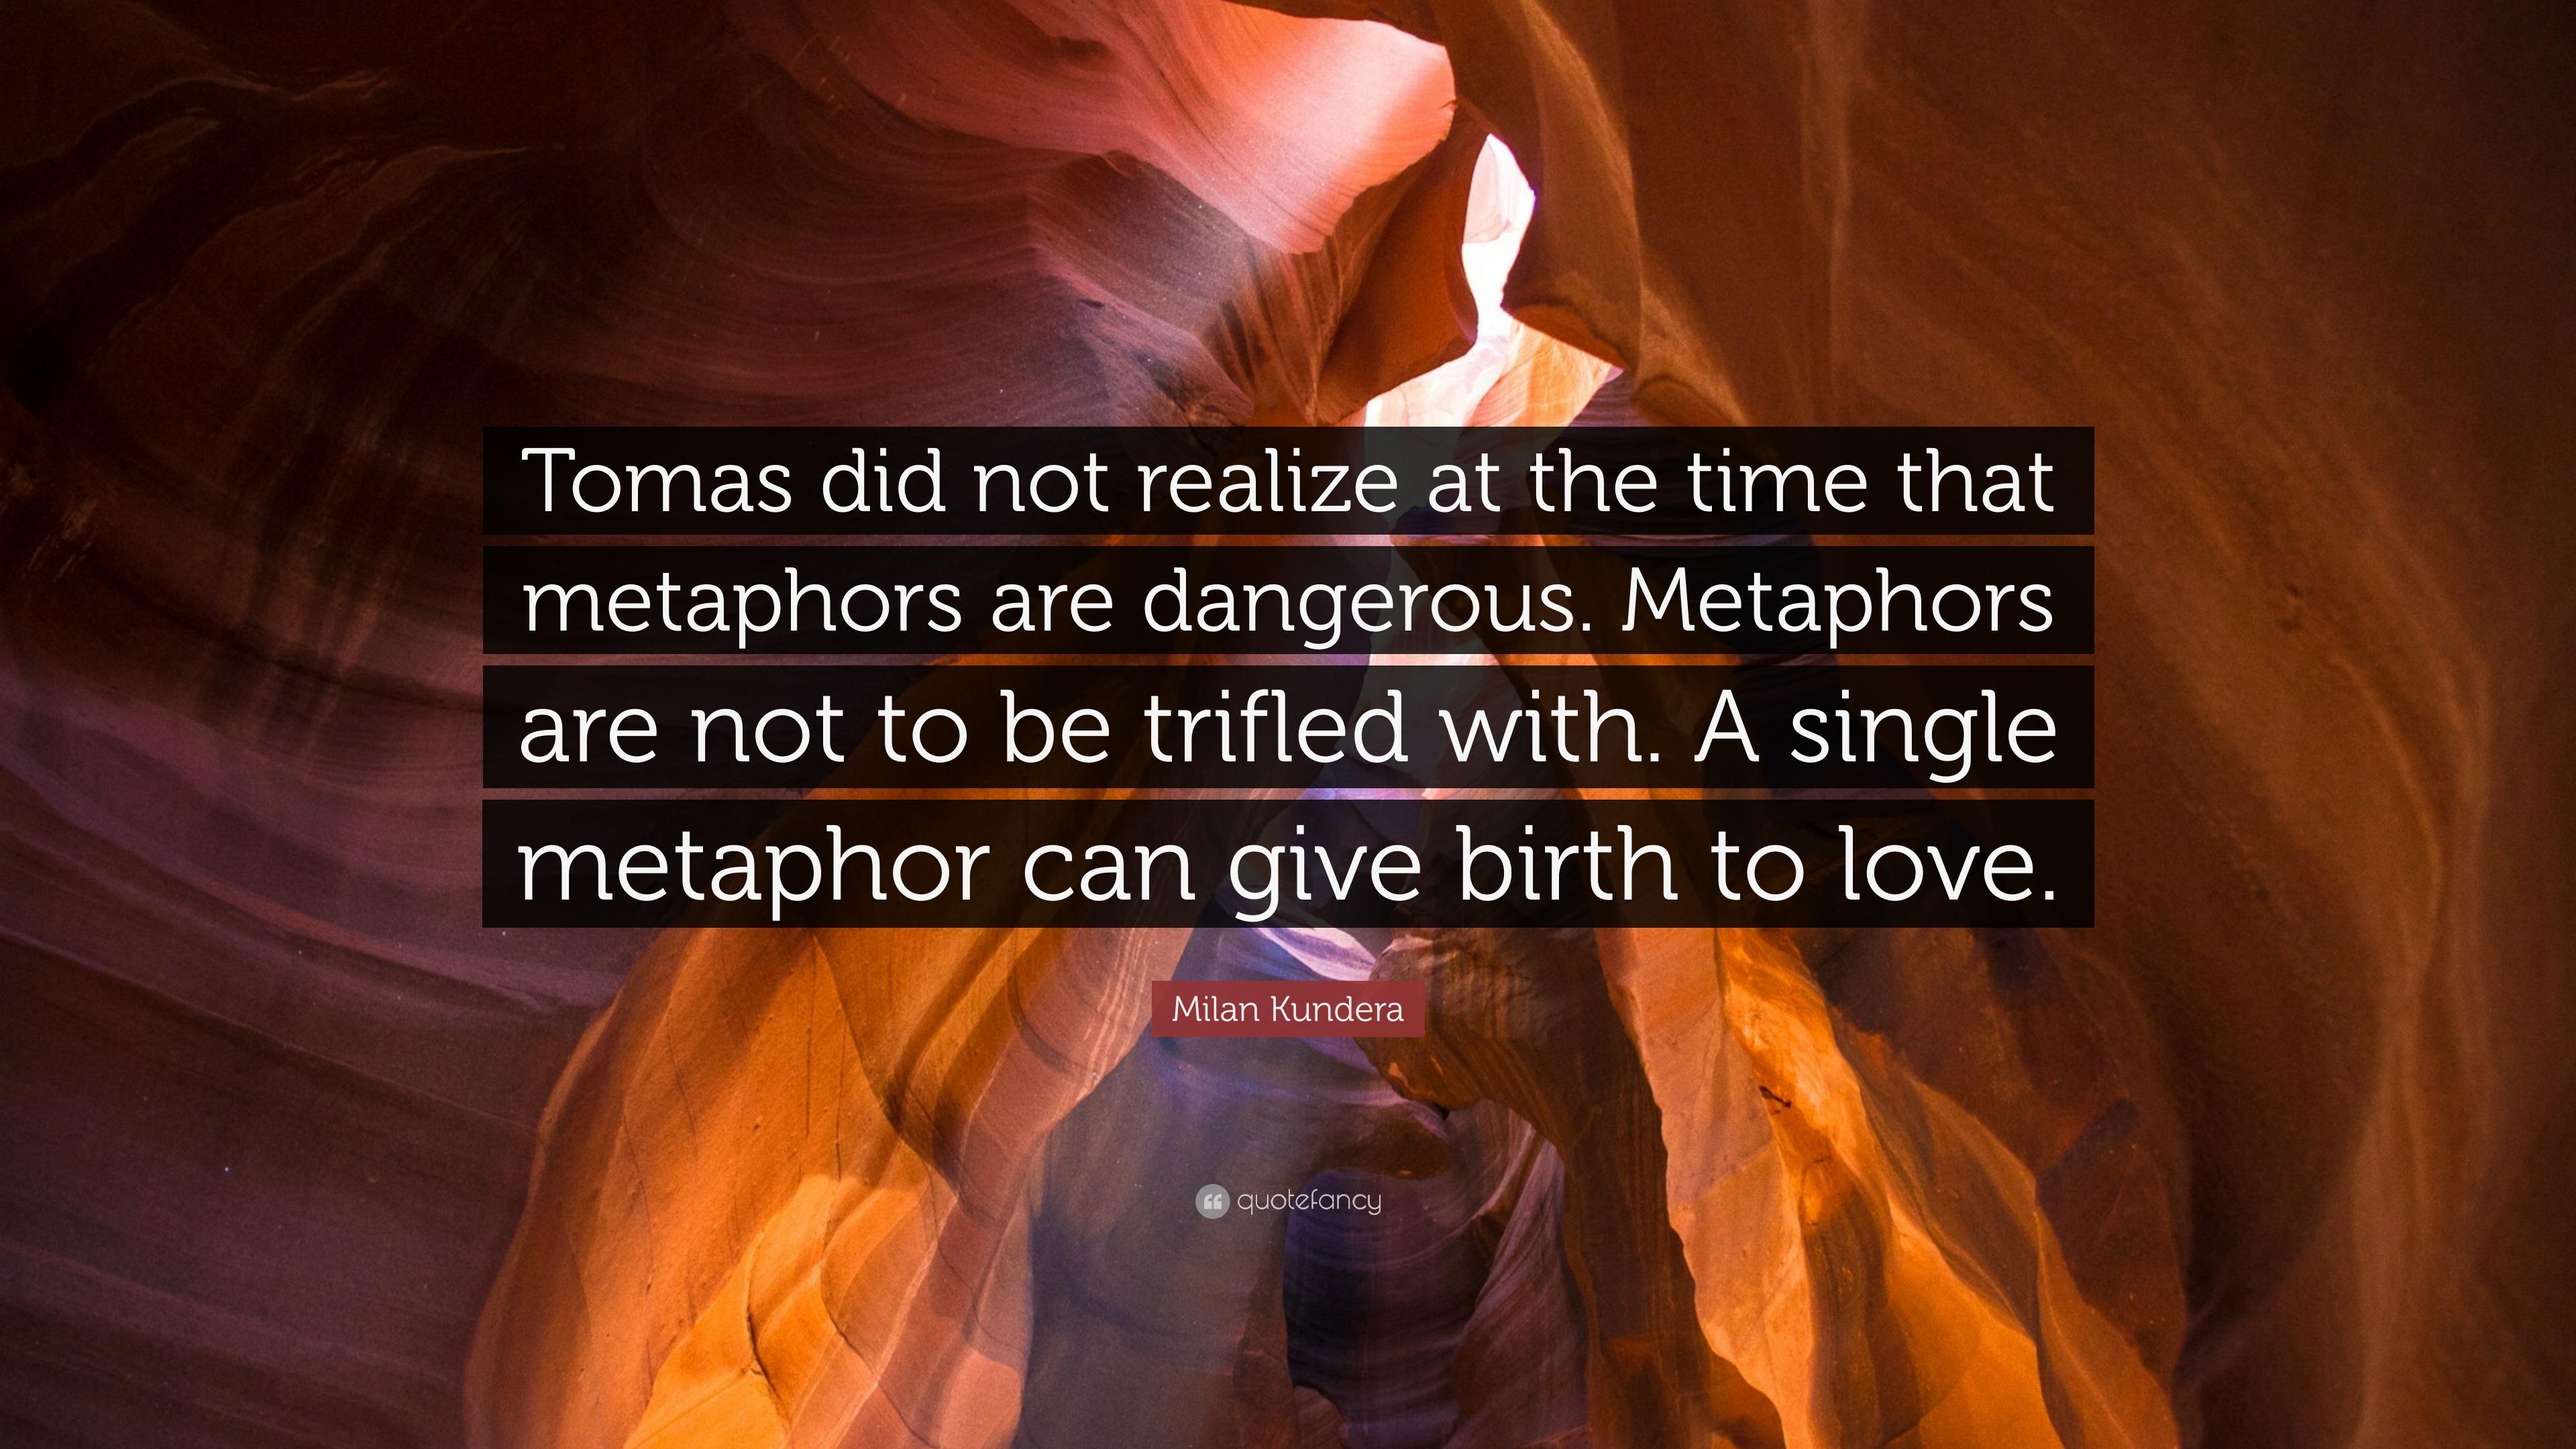 Milan Kundera Quote “tomas Did Not Realize At The Time That Metaphors Are Dangerous Metaphors